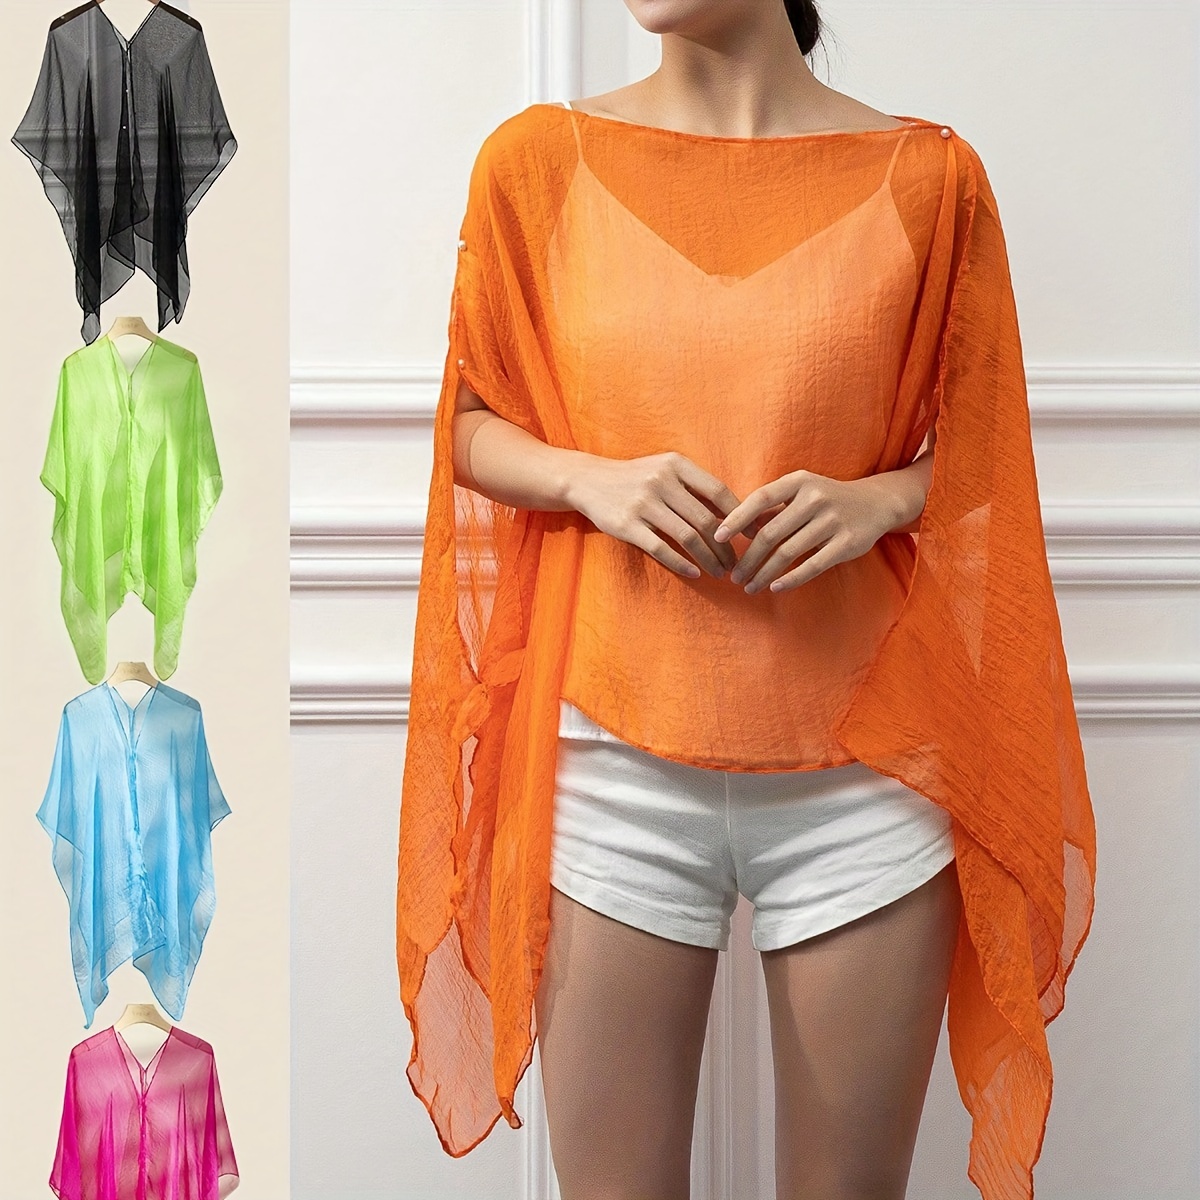 

Soft Solid Color Gauze Shawl Oversized Sunproof Bikini Cover Up Casual Loose Wrap Cardigan Uv Protection Travel Beach Towel For Summer Outdoor